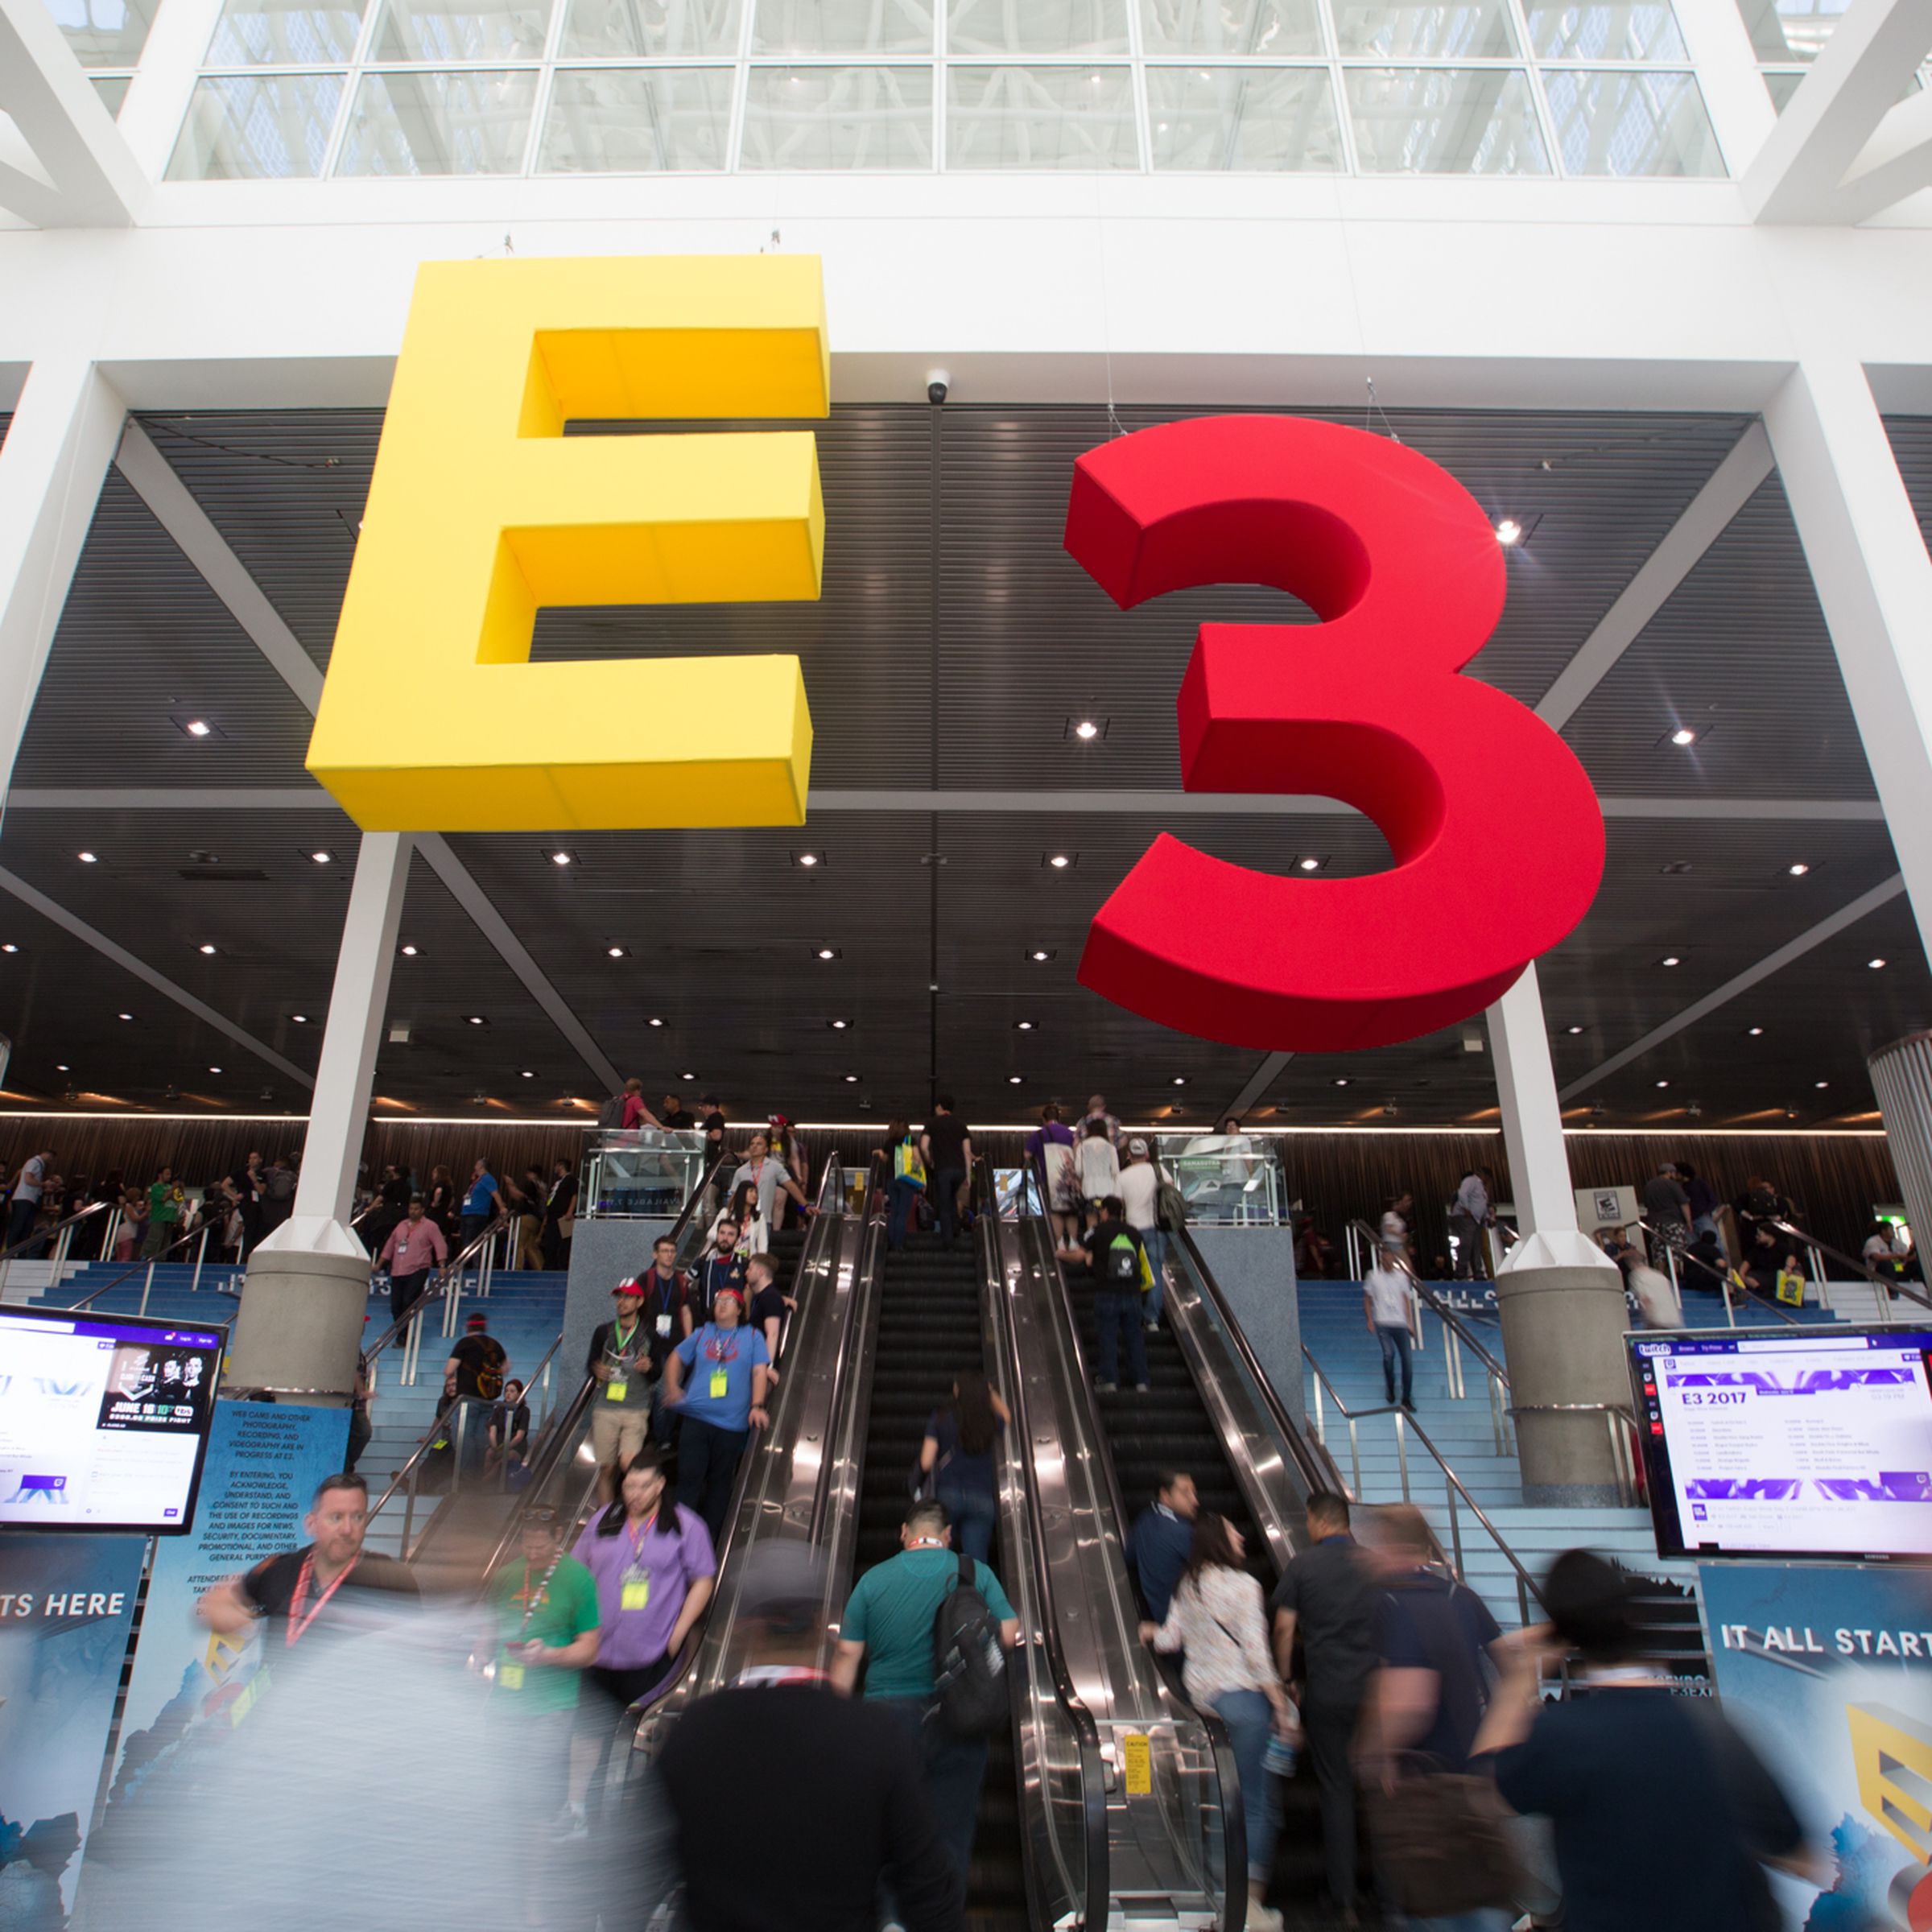 The letter “E” and number “3” hung over the escalators at the Electronic Entertainment Expo.